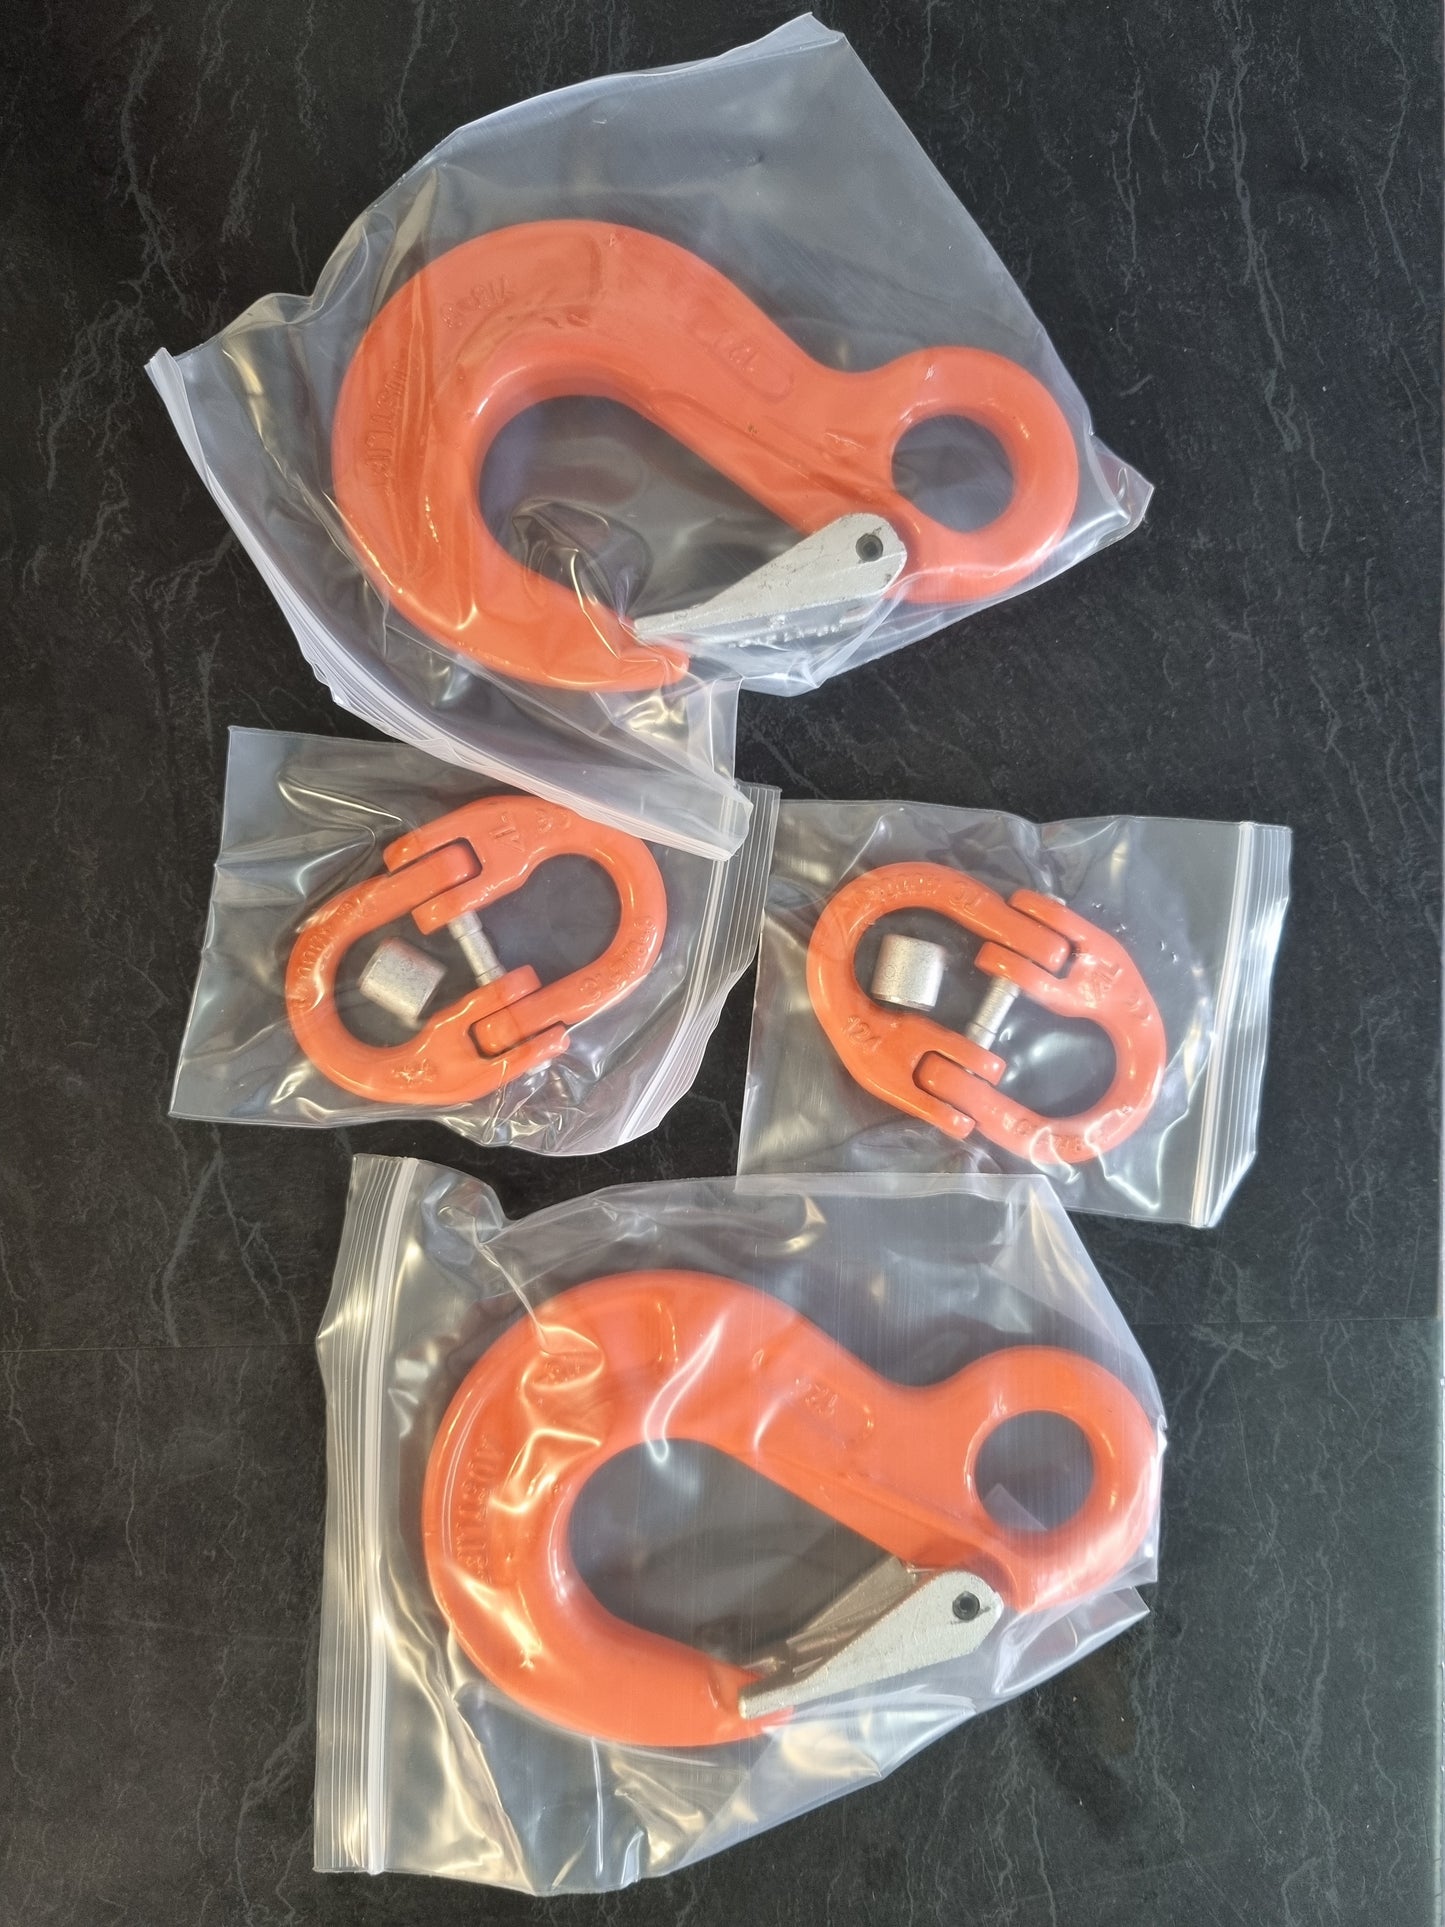 Vehicle Chain Safety Hook Set 10mm